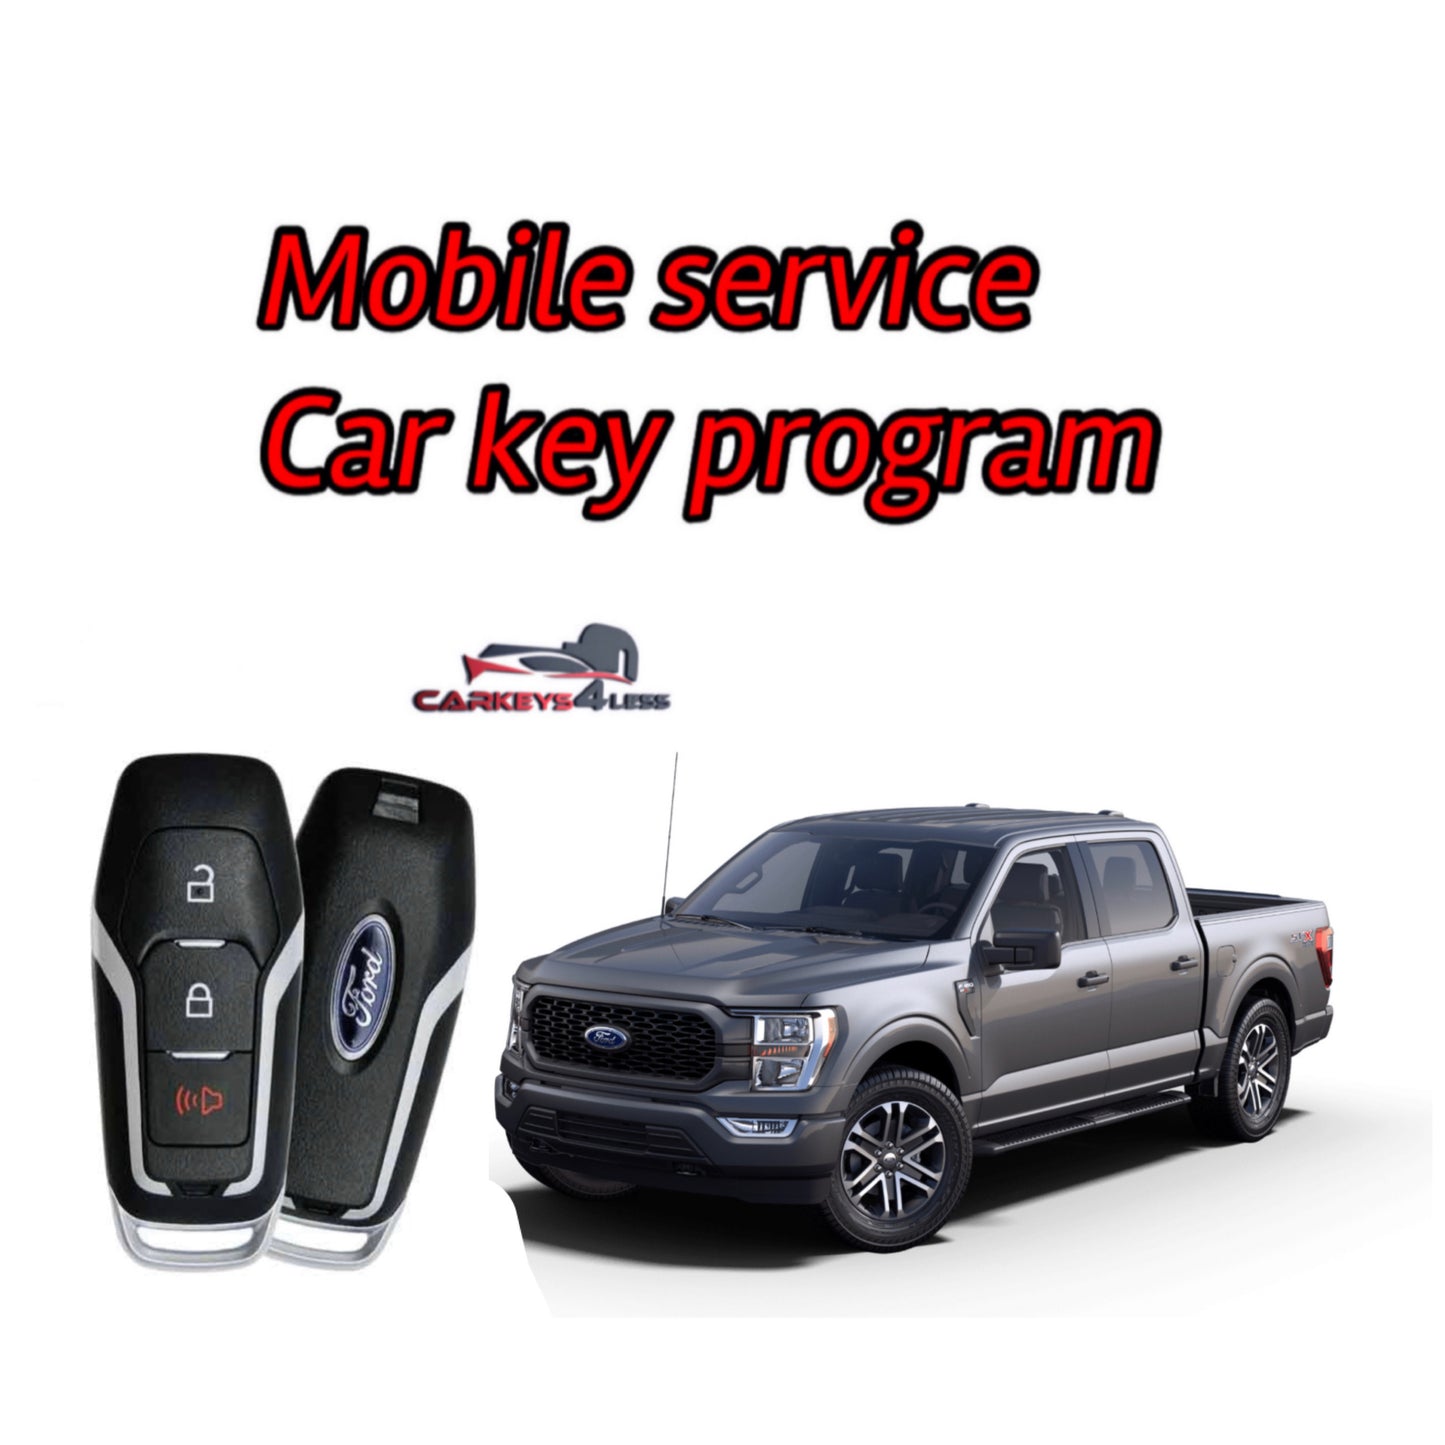 Mobile service for an oem refurbished ford smart key replacement